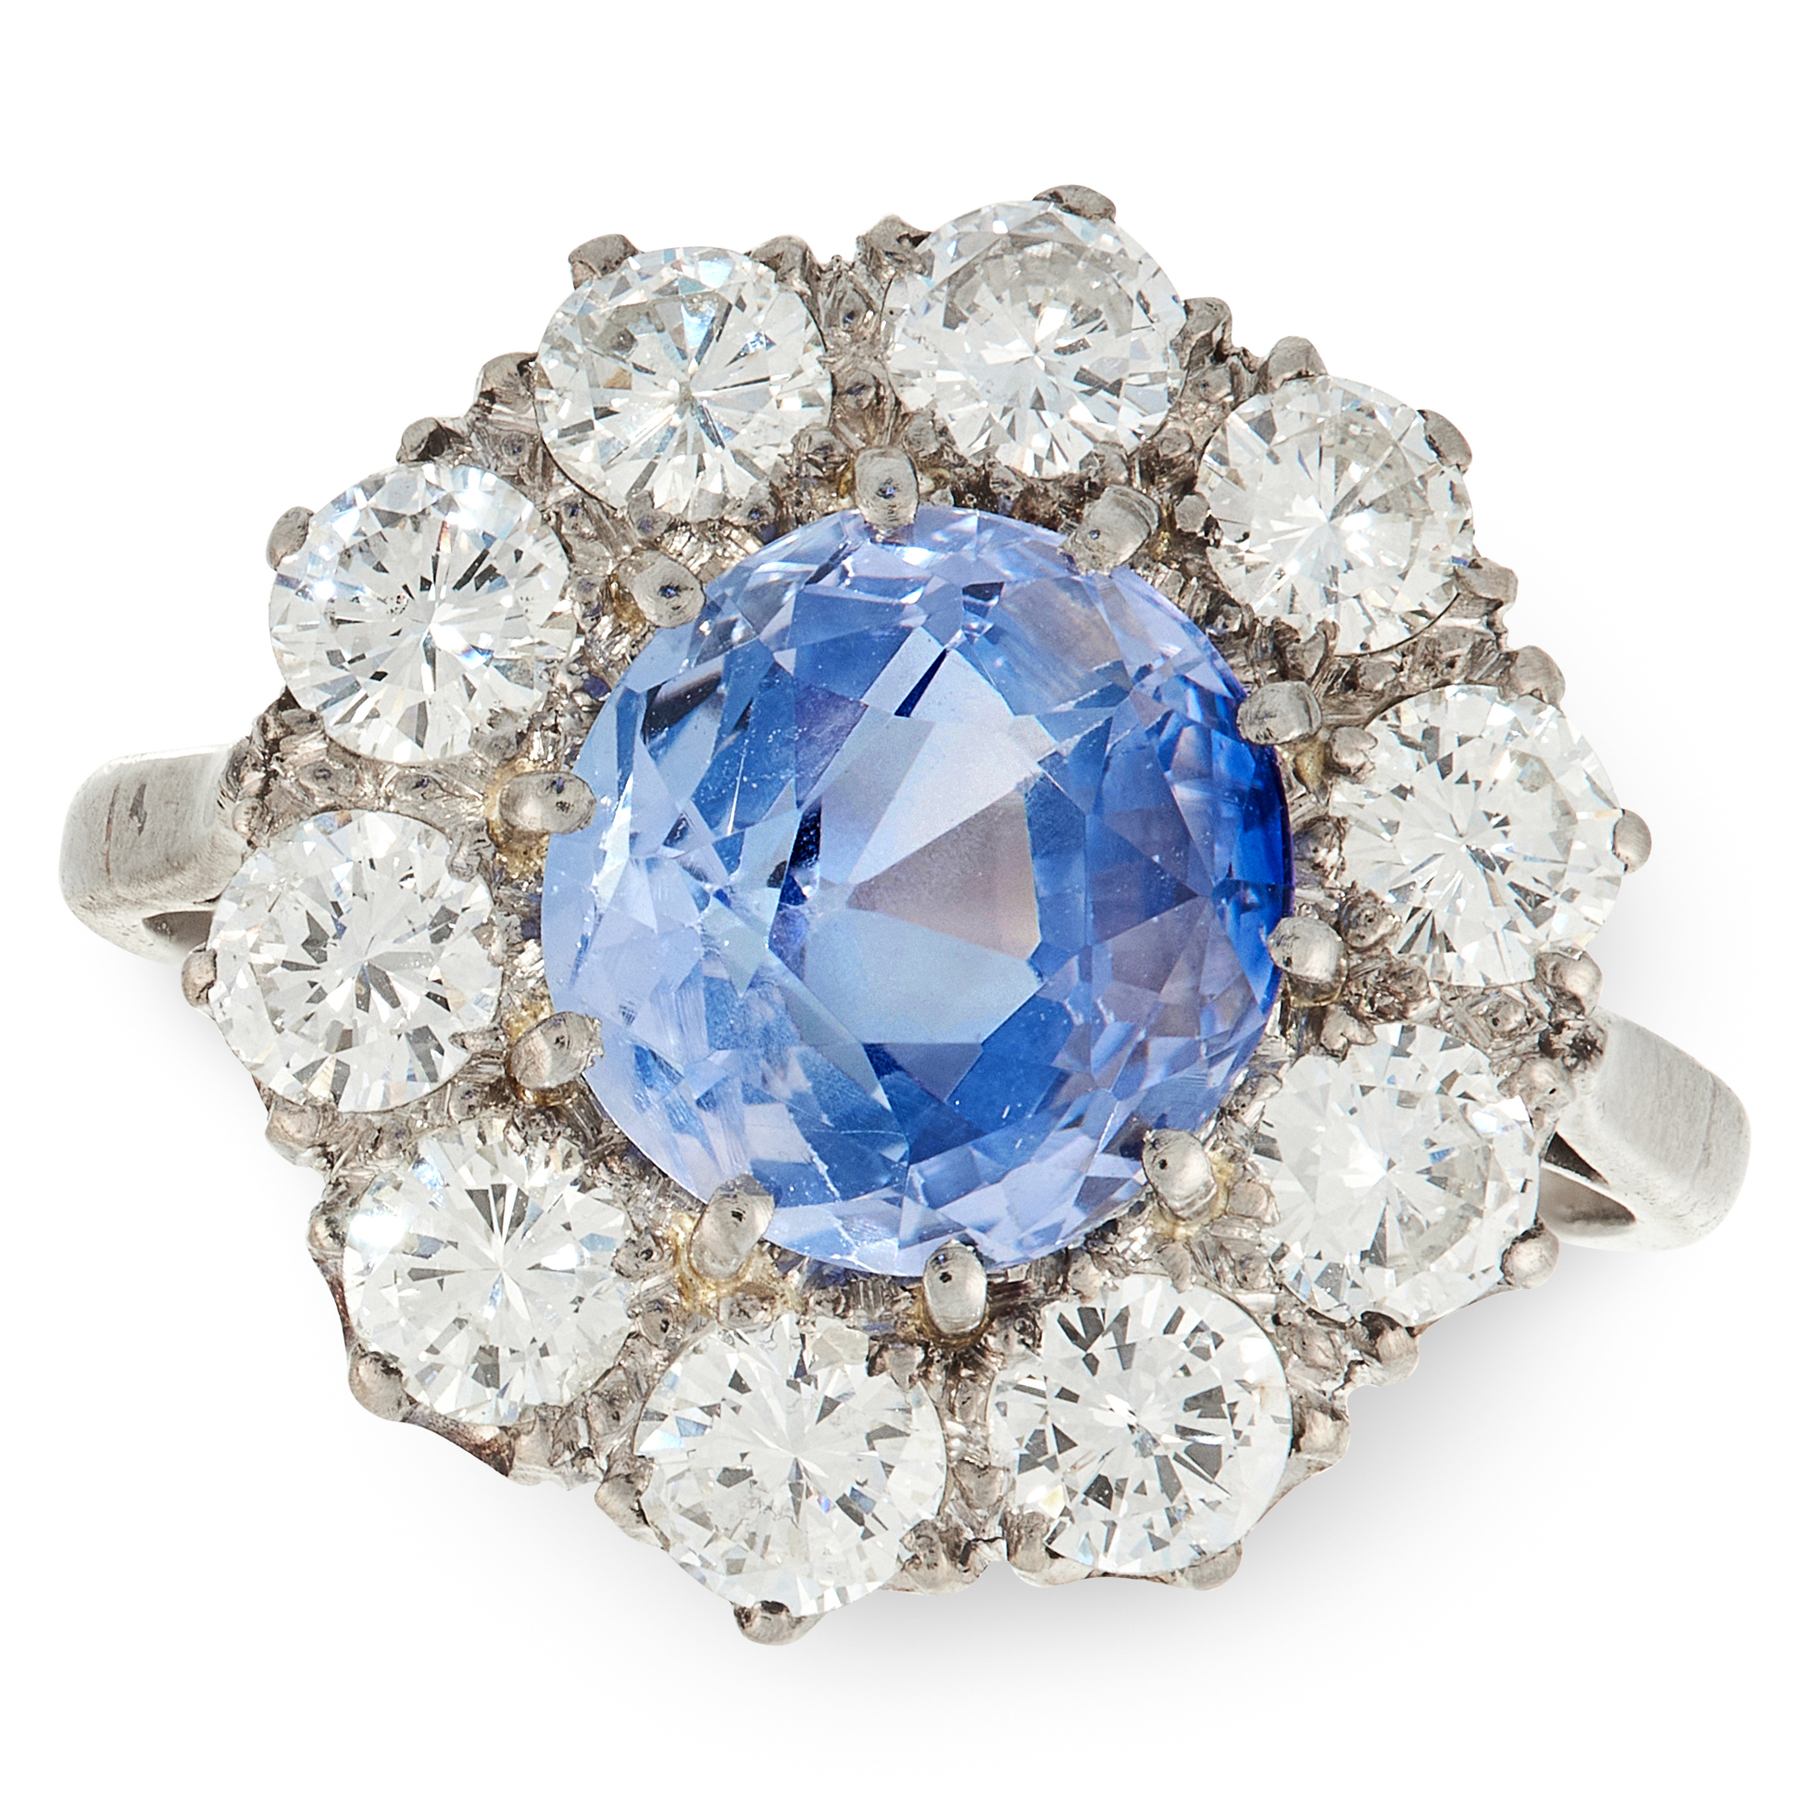 A CEYLON NO HEAT SAPPHIRE AND DIAMOND RING in 18ct white gold and platinum, set with a round cut